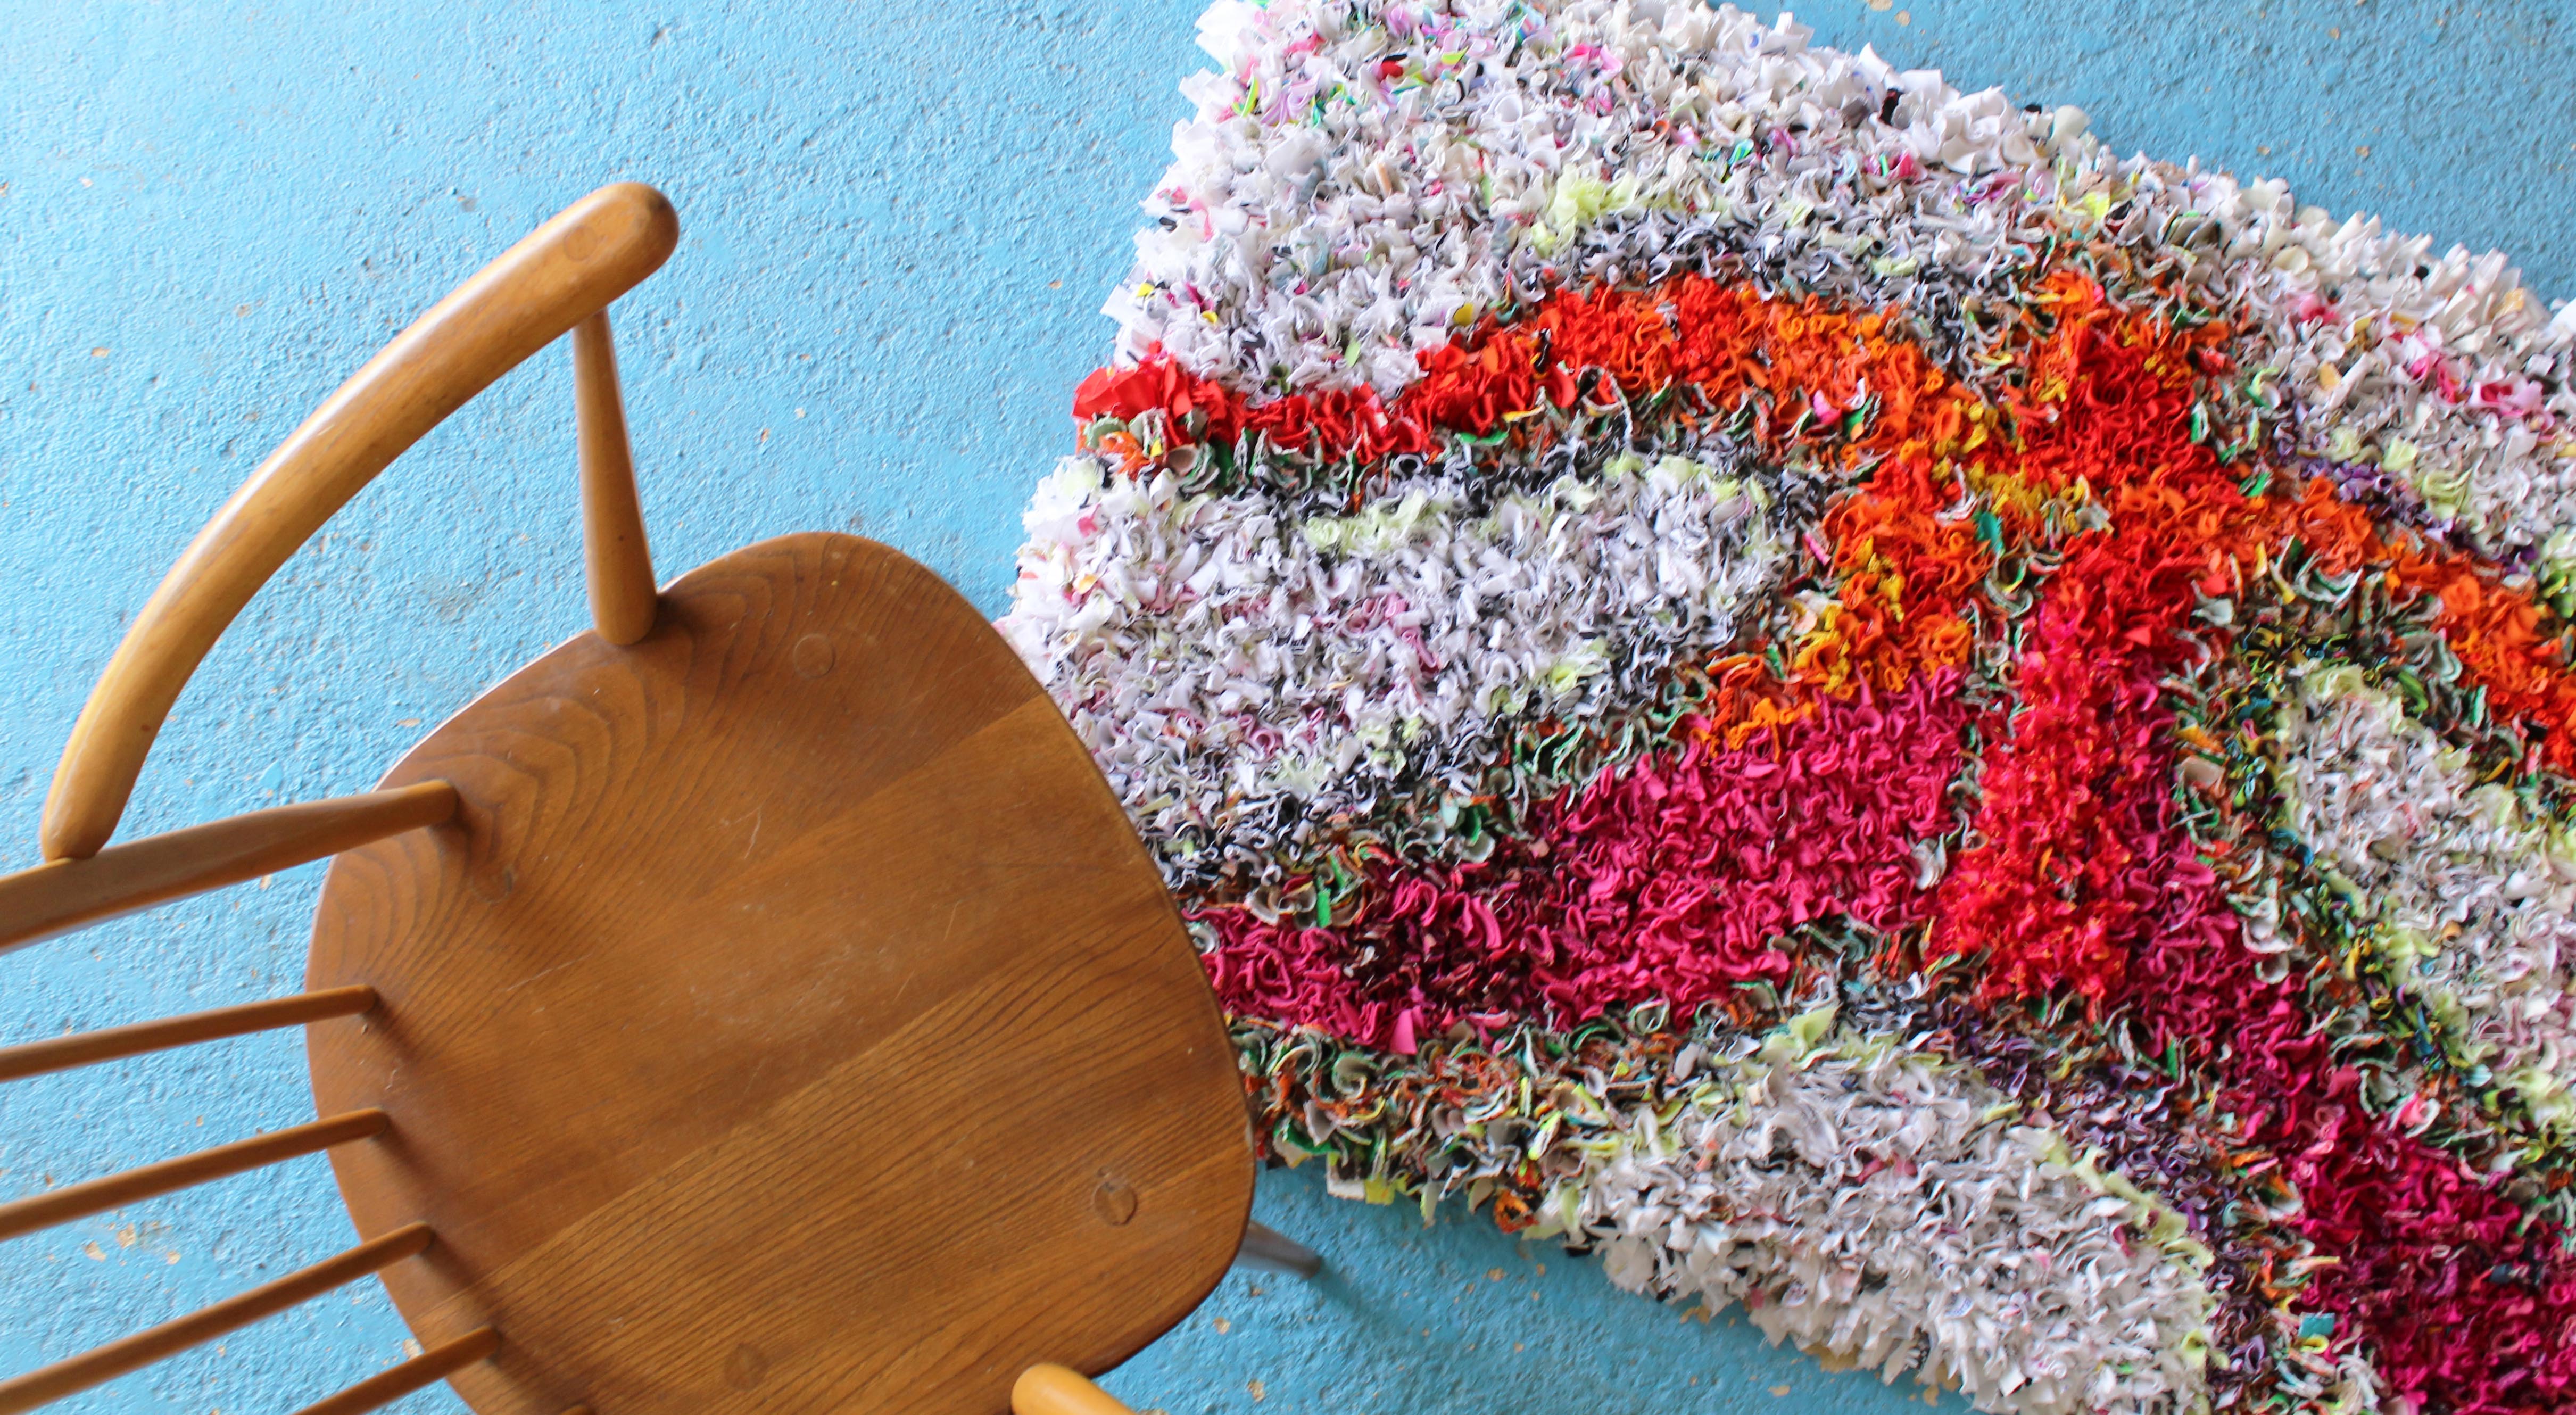 Rag Rug on Blue Floor with Wooden Ercol Chair